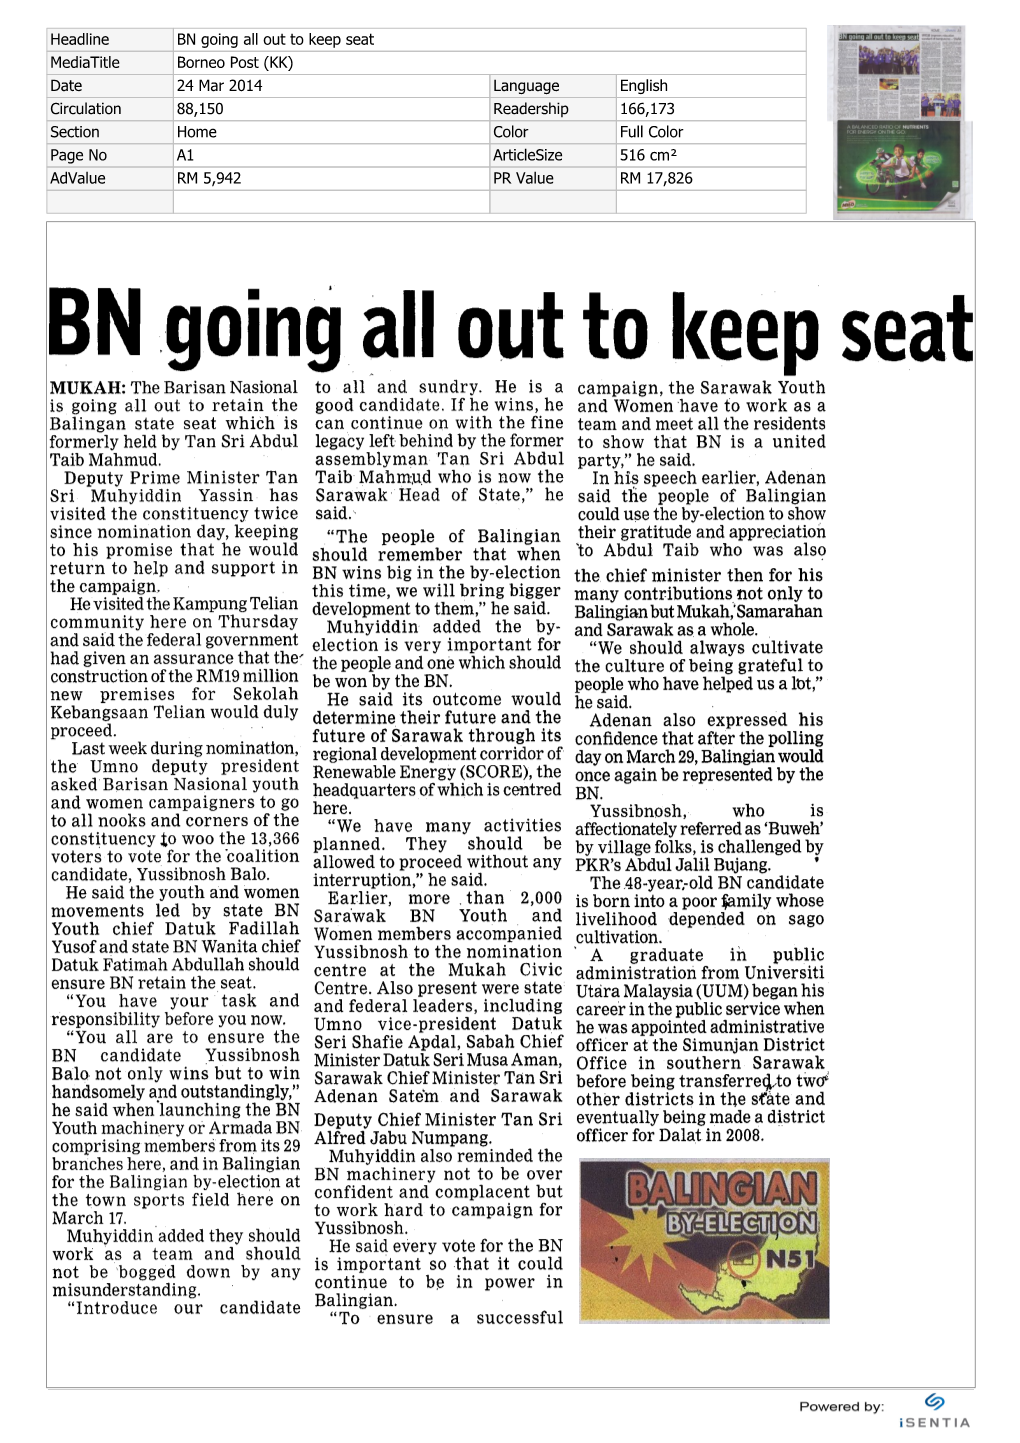 BN Going All out to Keep Seat